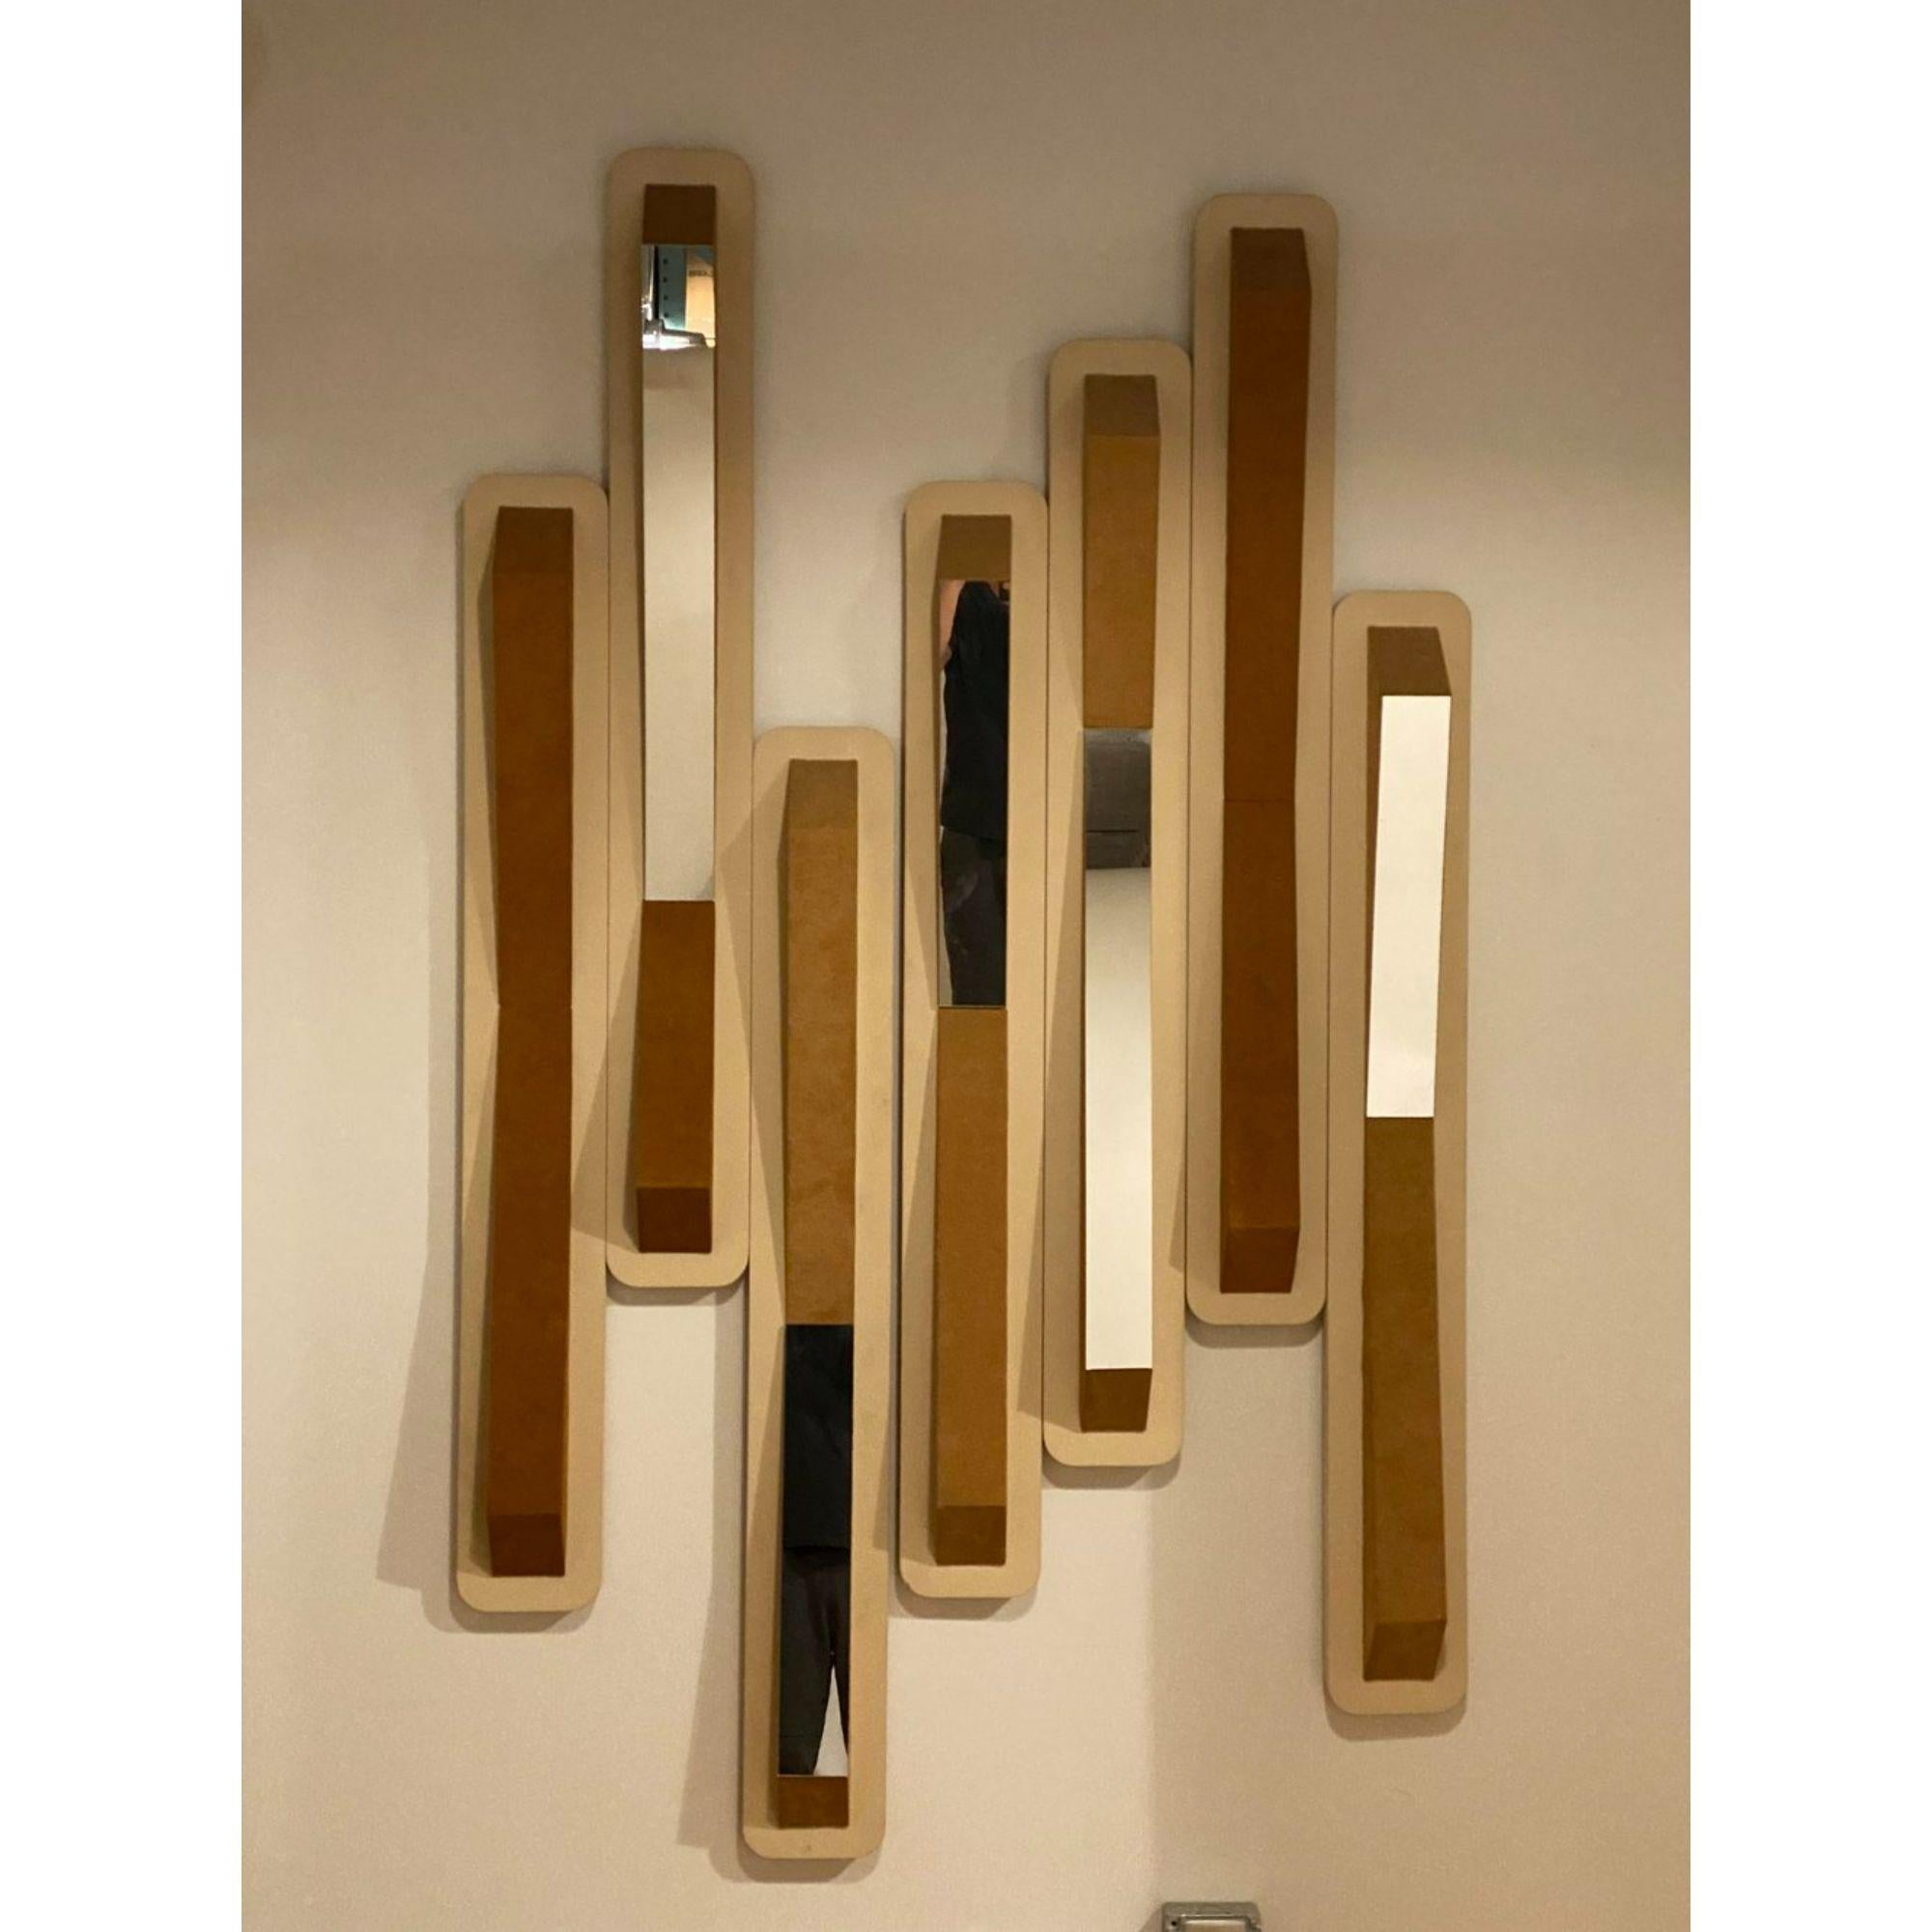 Massive vintage modern wall sculpture by Chicago artist, Steven L. Winer, signed and dated, 1980. This two piece wall hung sculpture is crafted from carved and painted wood with recessed mirror and suede upholstered panels. Although this sculpture